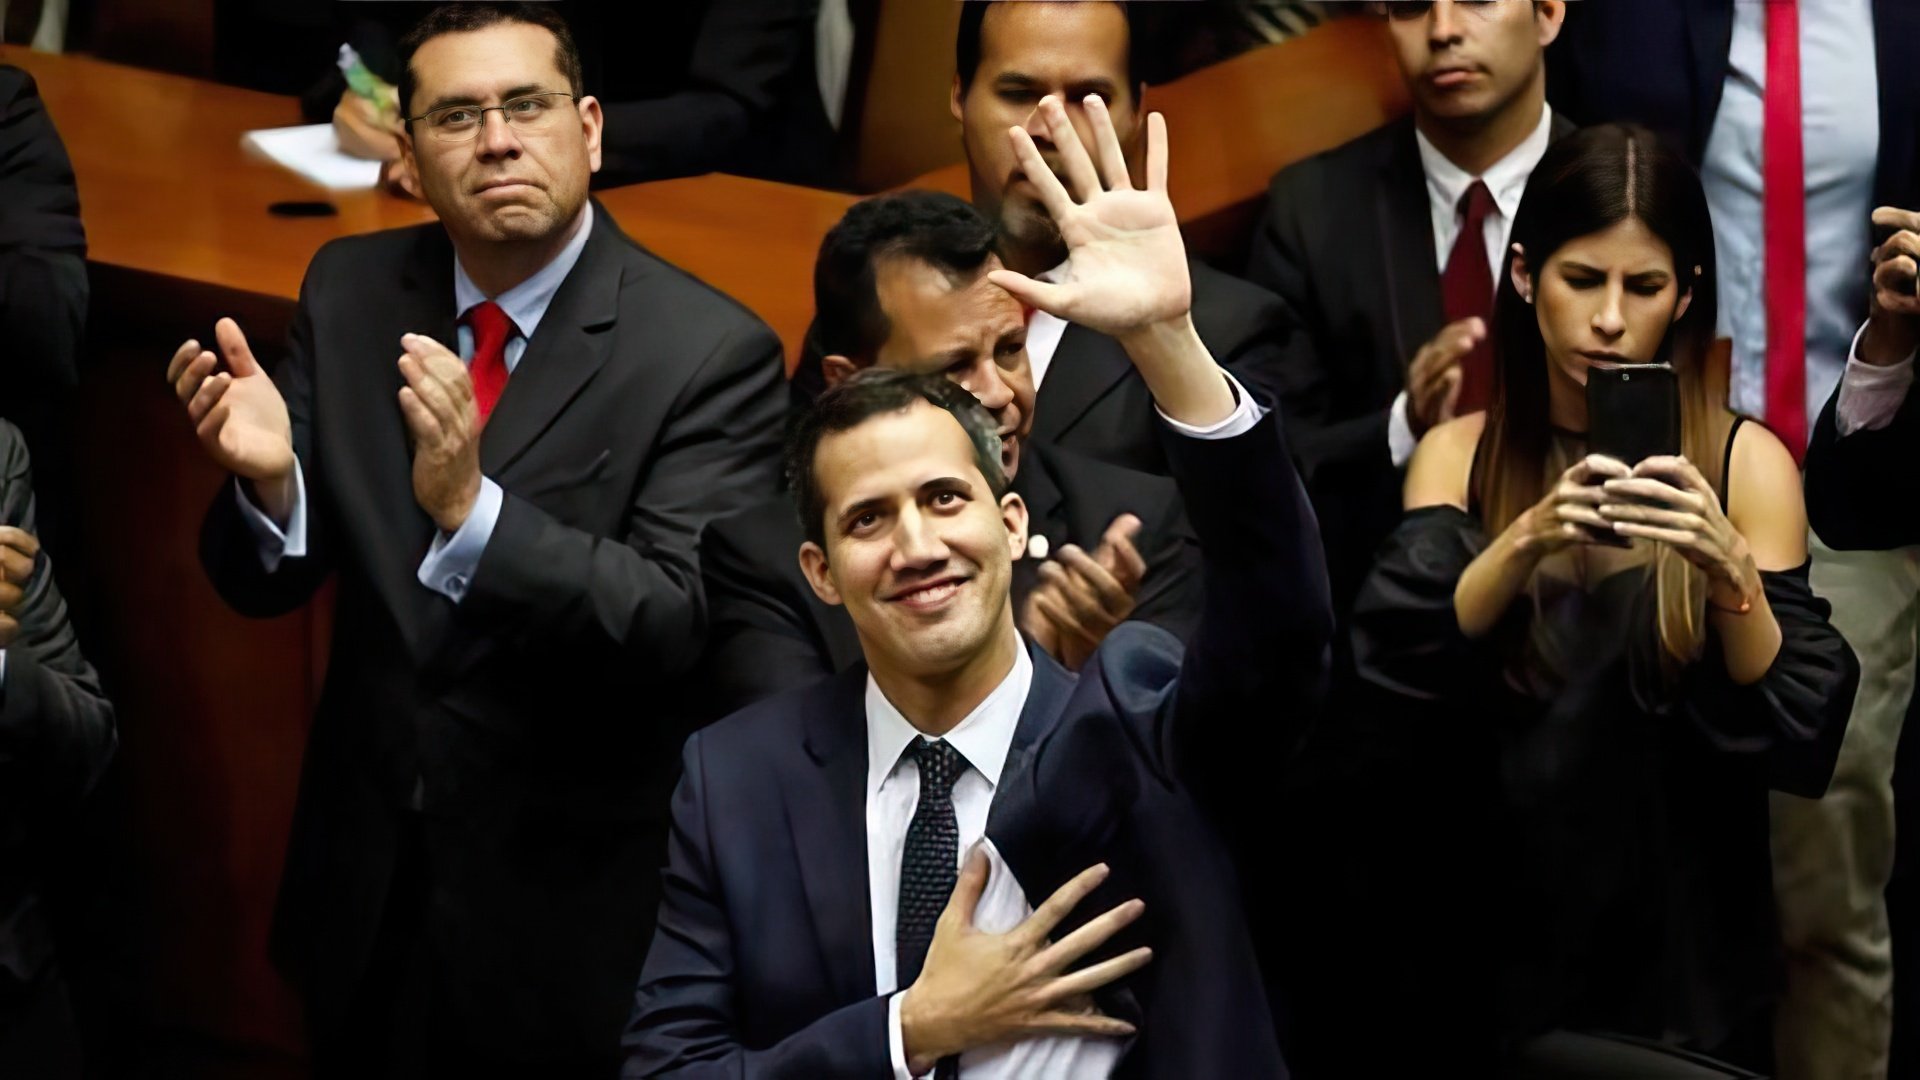 Juan Guaido became the federal deputy to the National Assembly of Venezuela